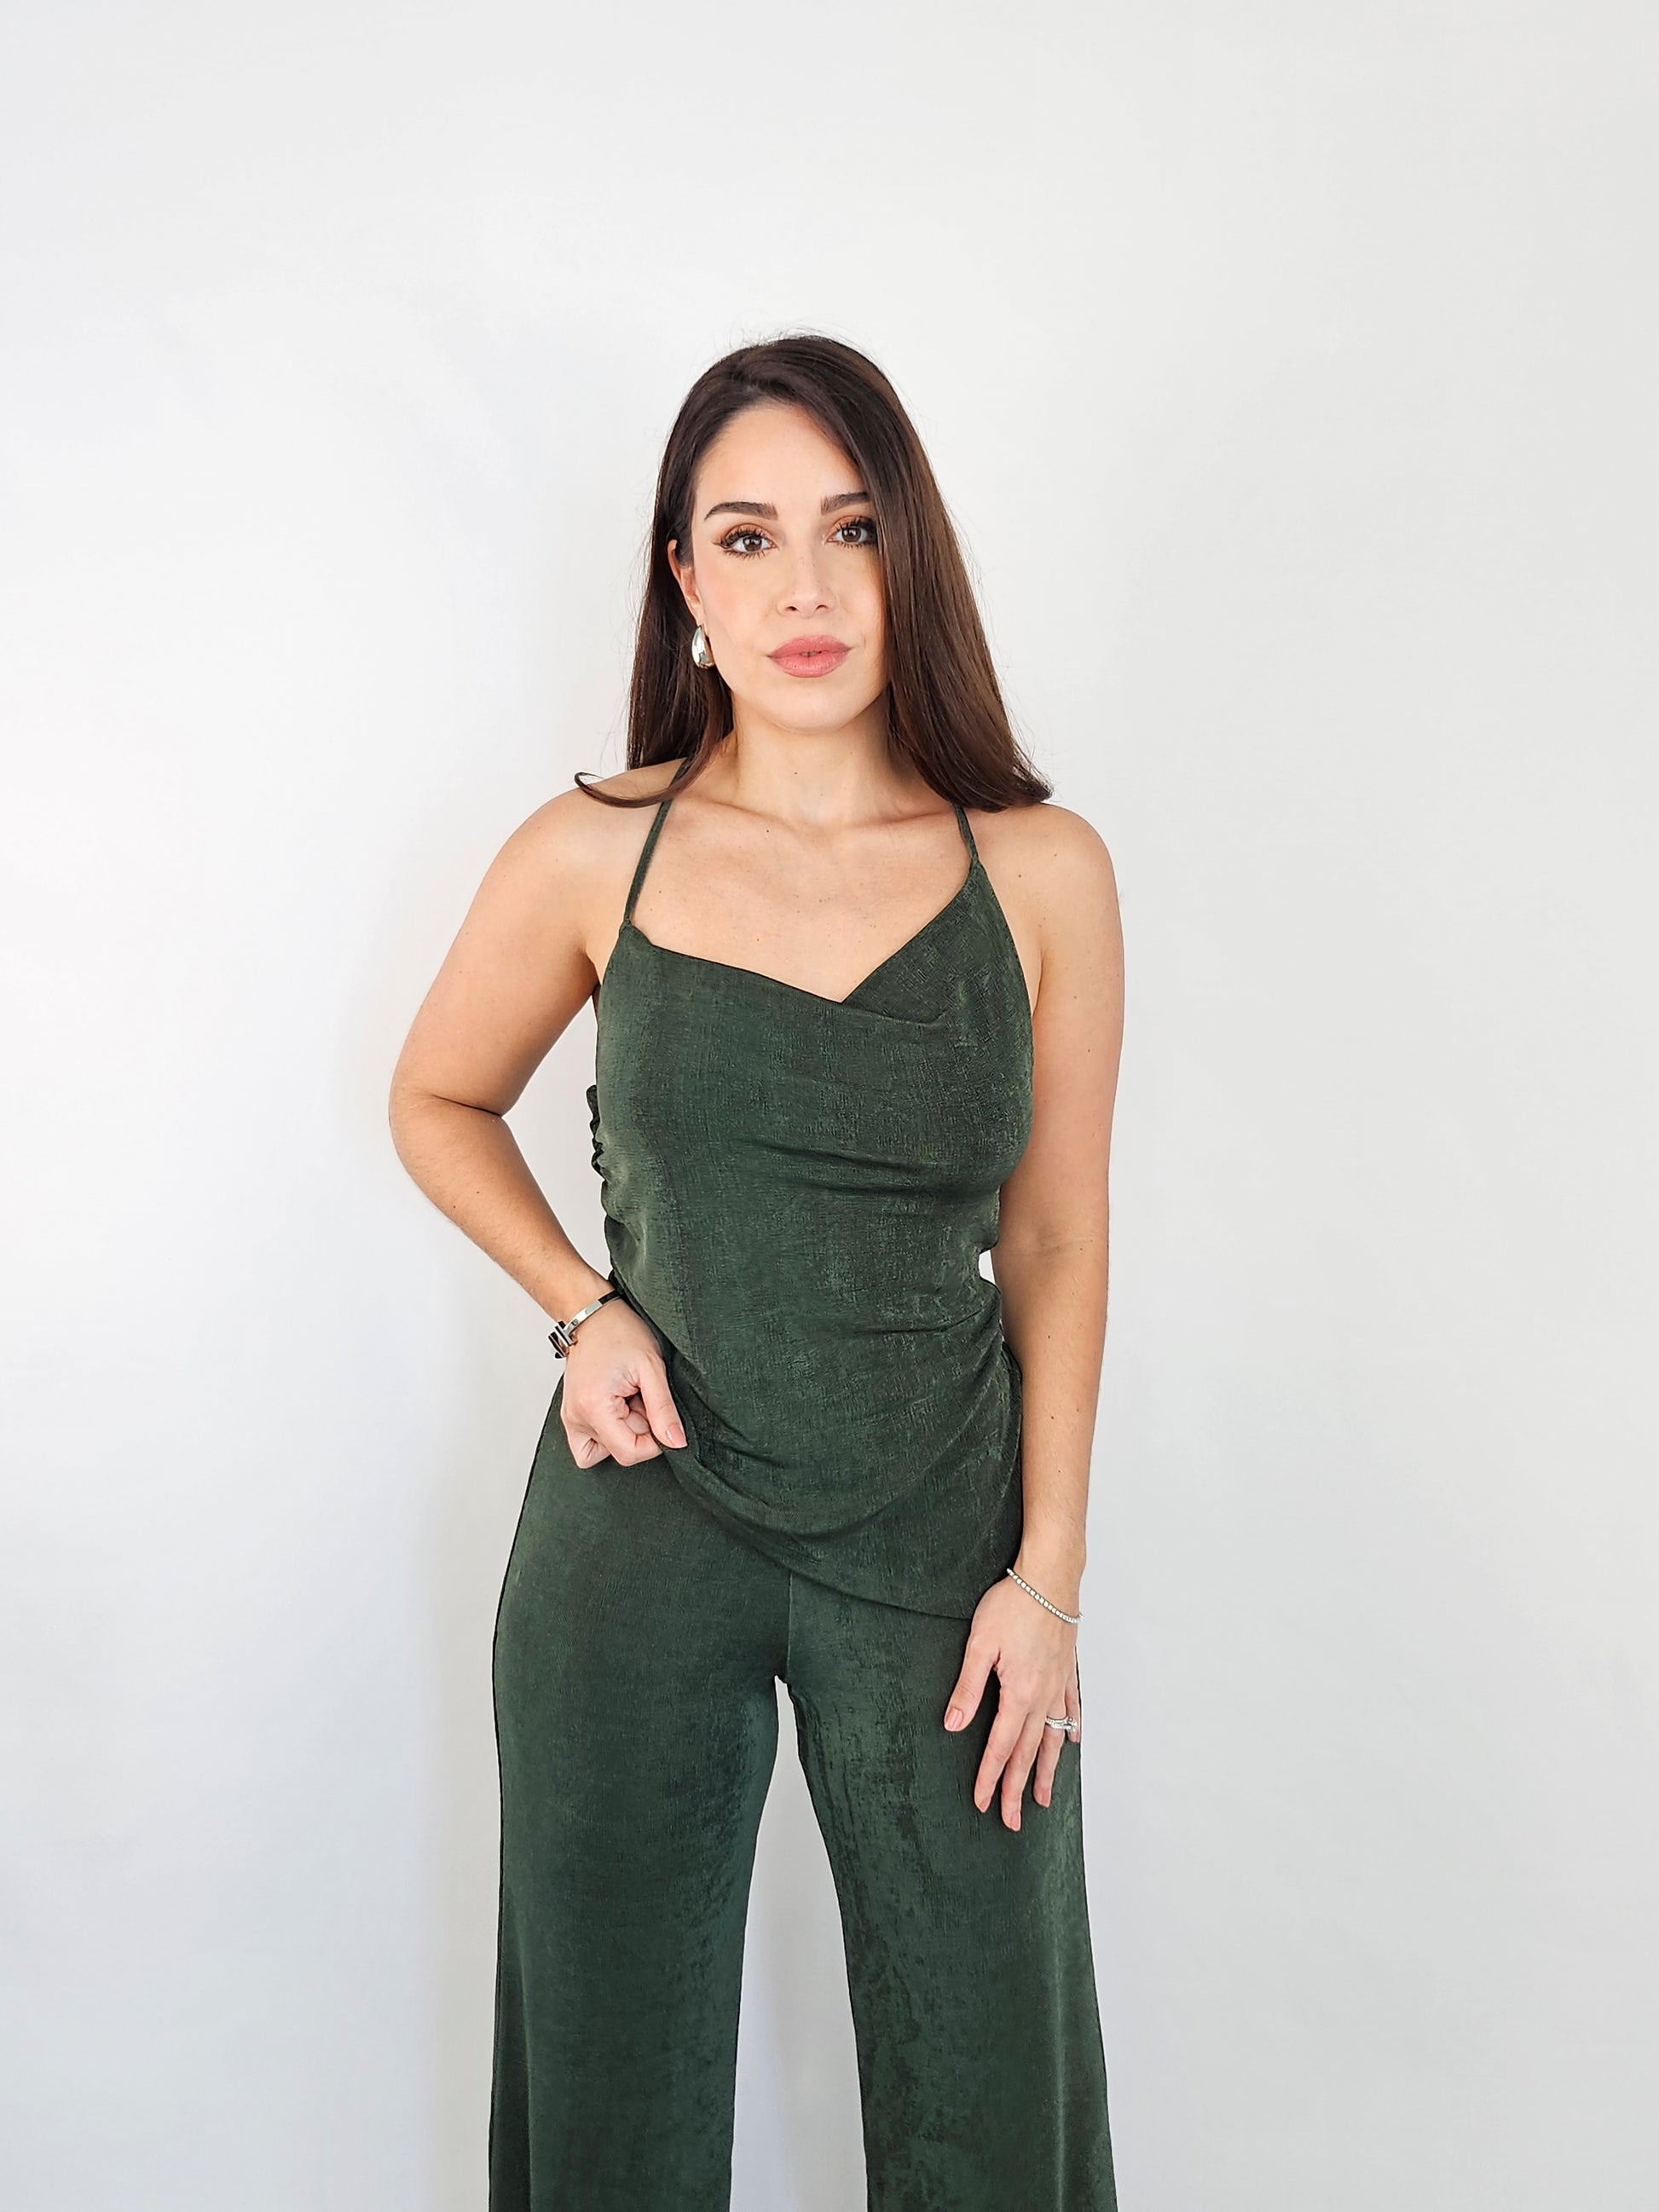 co ord sets women. This green set is so comfy and chic and a great piece to have for everyday wear.